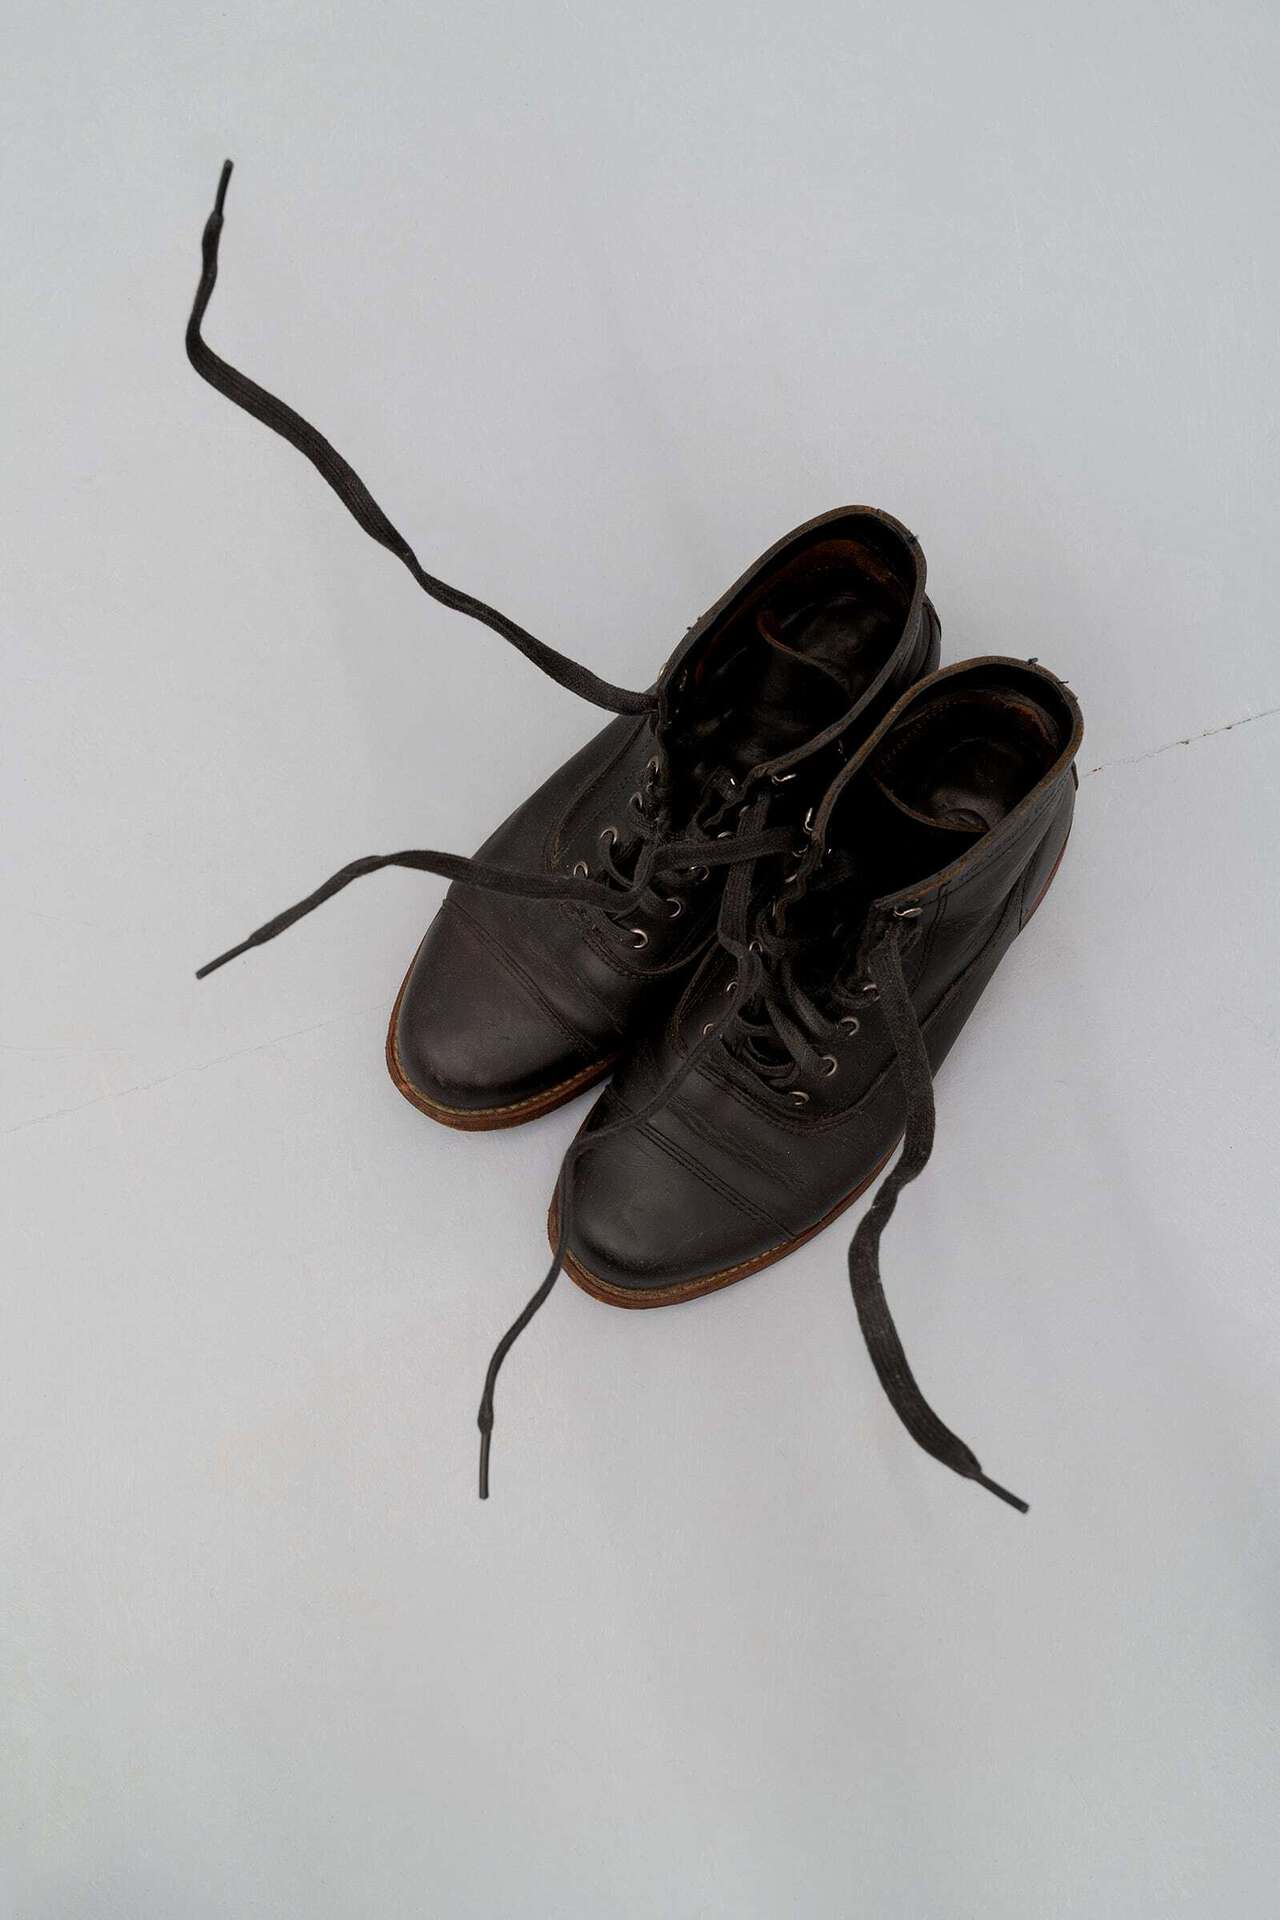 Vitaly Bezpalov, My feet have taken root in the soil forming a perennial vegetation as far as my belly, and filled with vile parasites. Disastrous Life. My heart is still beating, 2021, Wolverine 1000 Mile vintage boots, wire, detentions vary